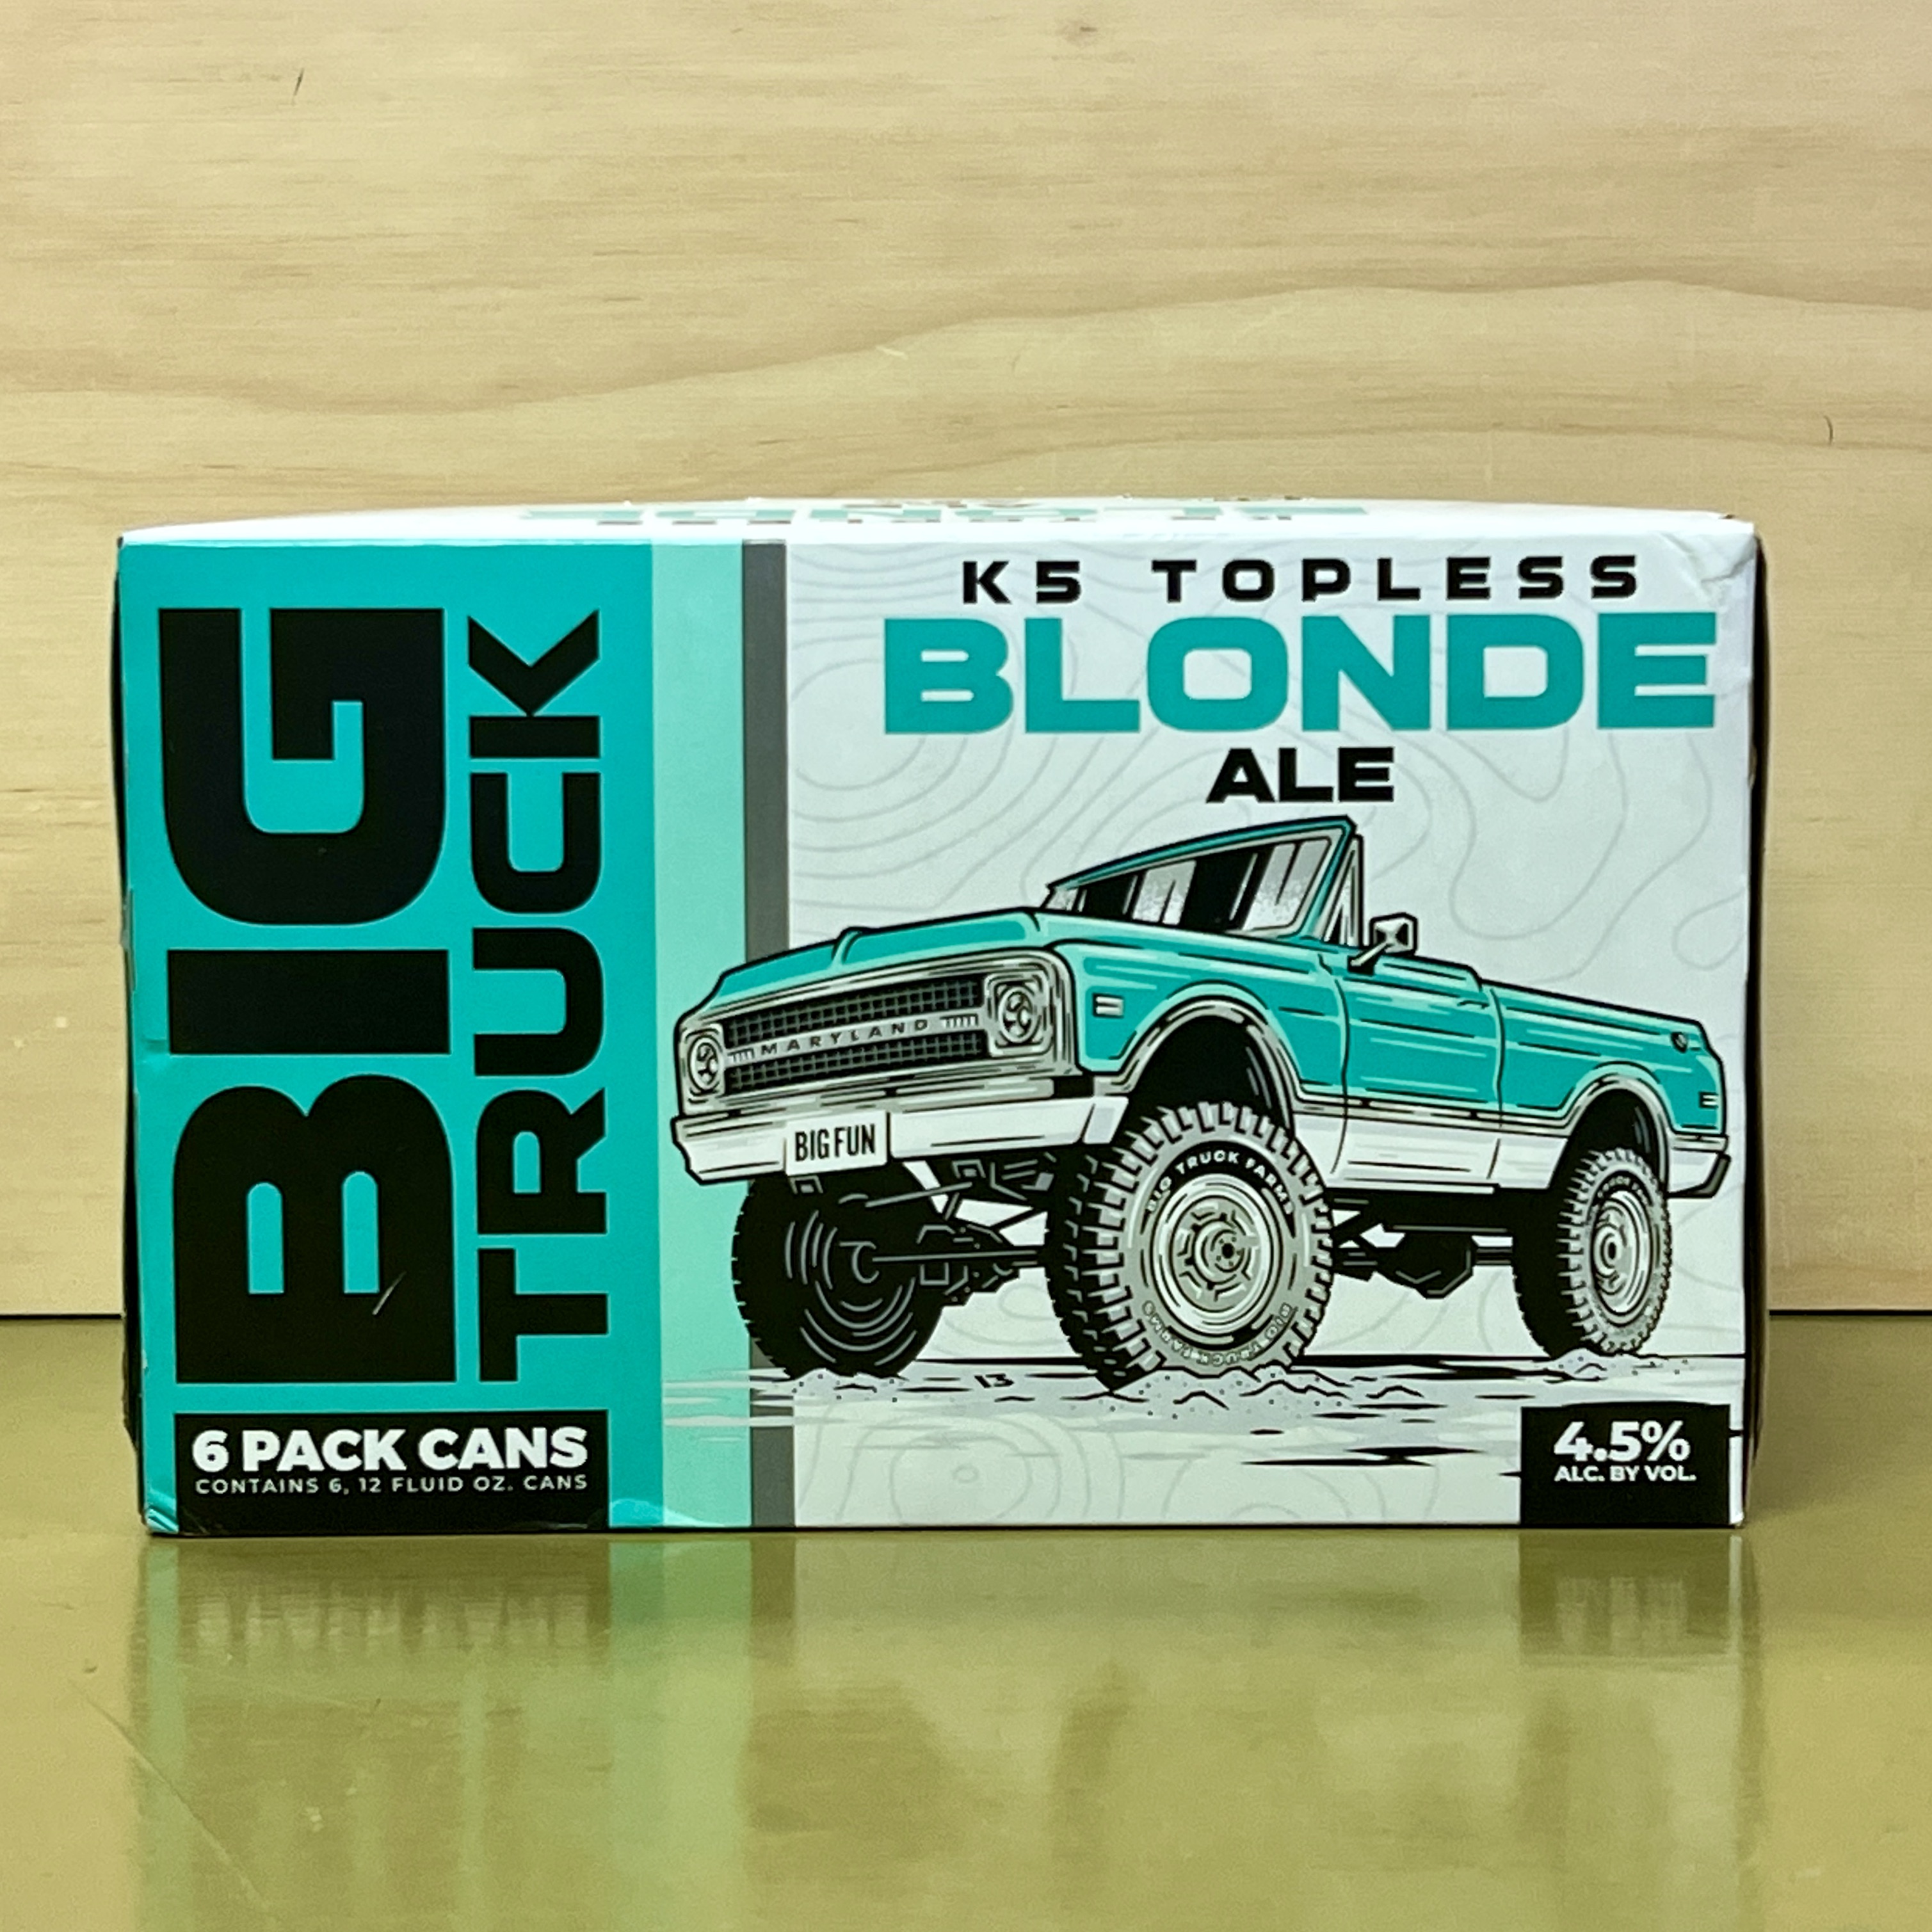 Big Truck K5 Topless Blonde Ale 6 x 12oz cans